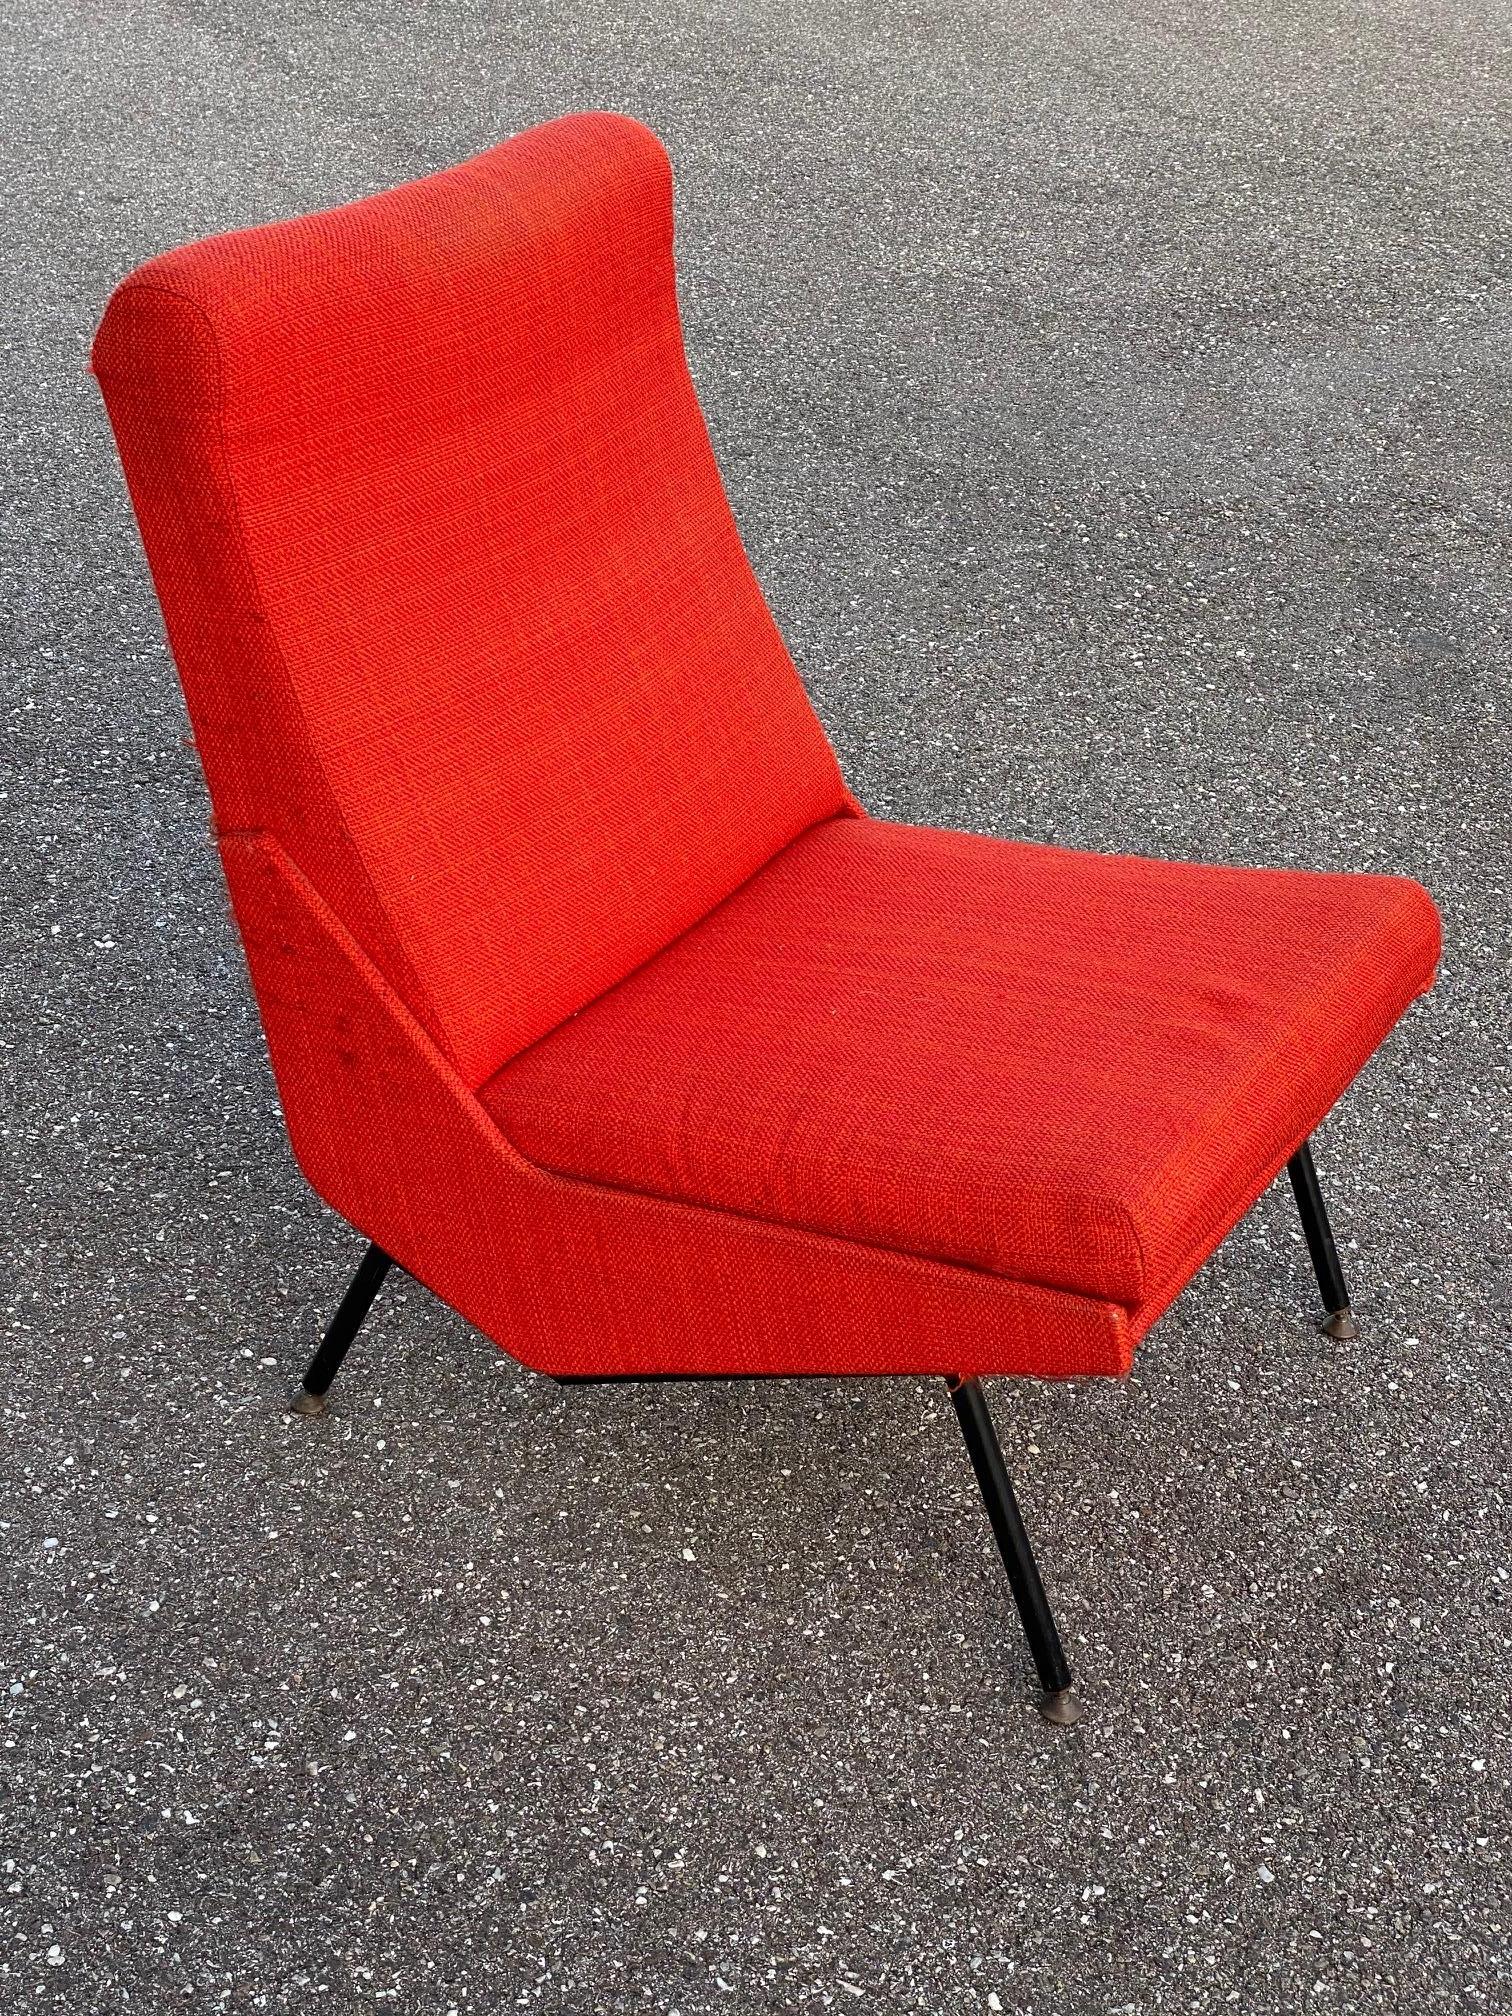 Troika Slipper Chair by Pierre Guariche In Good Condition For Sale In Brooklyn, NY